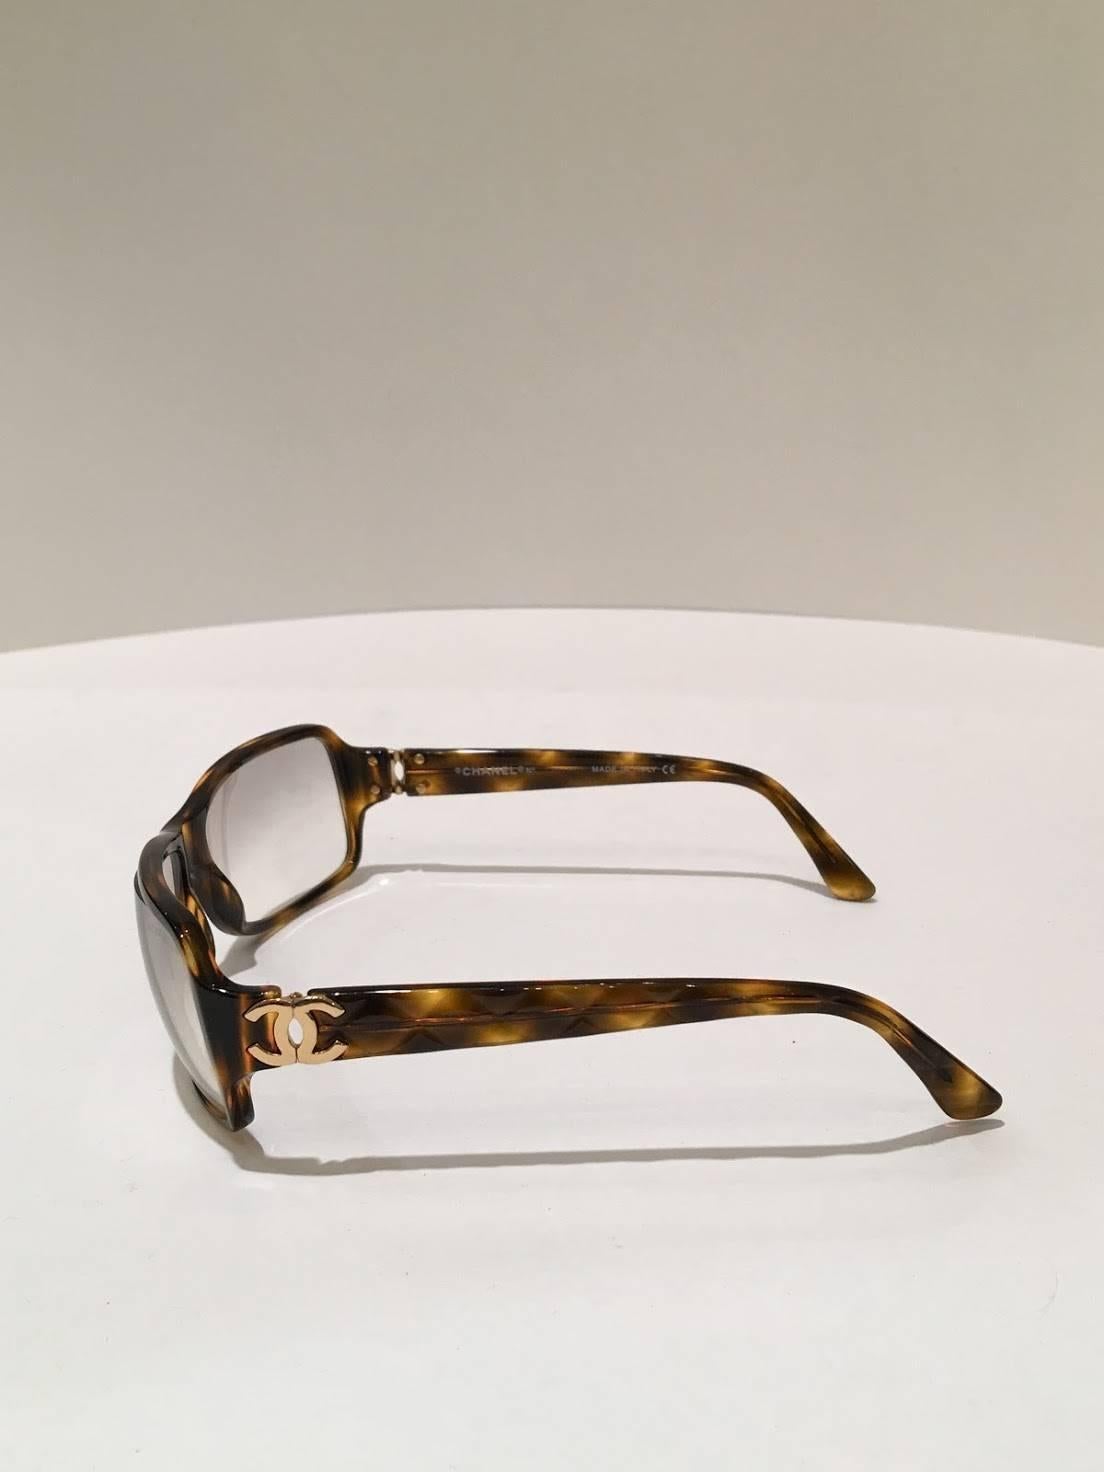 Chanel Tortoise Eyeglasses with Crosshatch arm detail and Gold Logo.